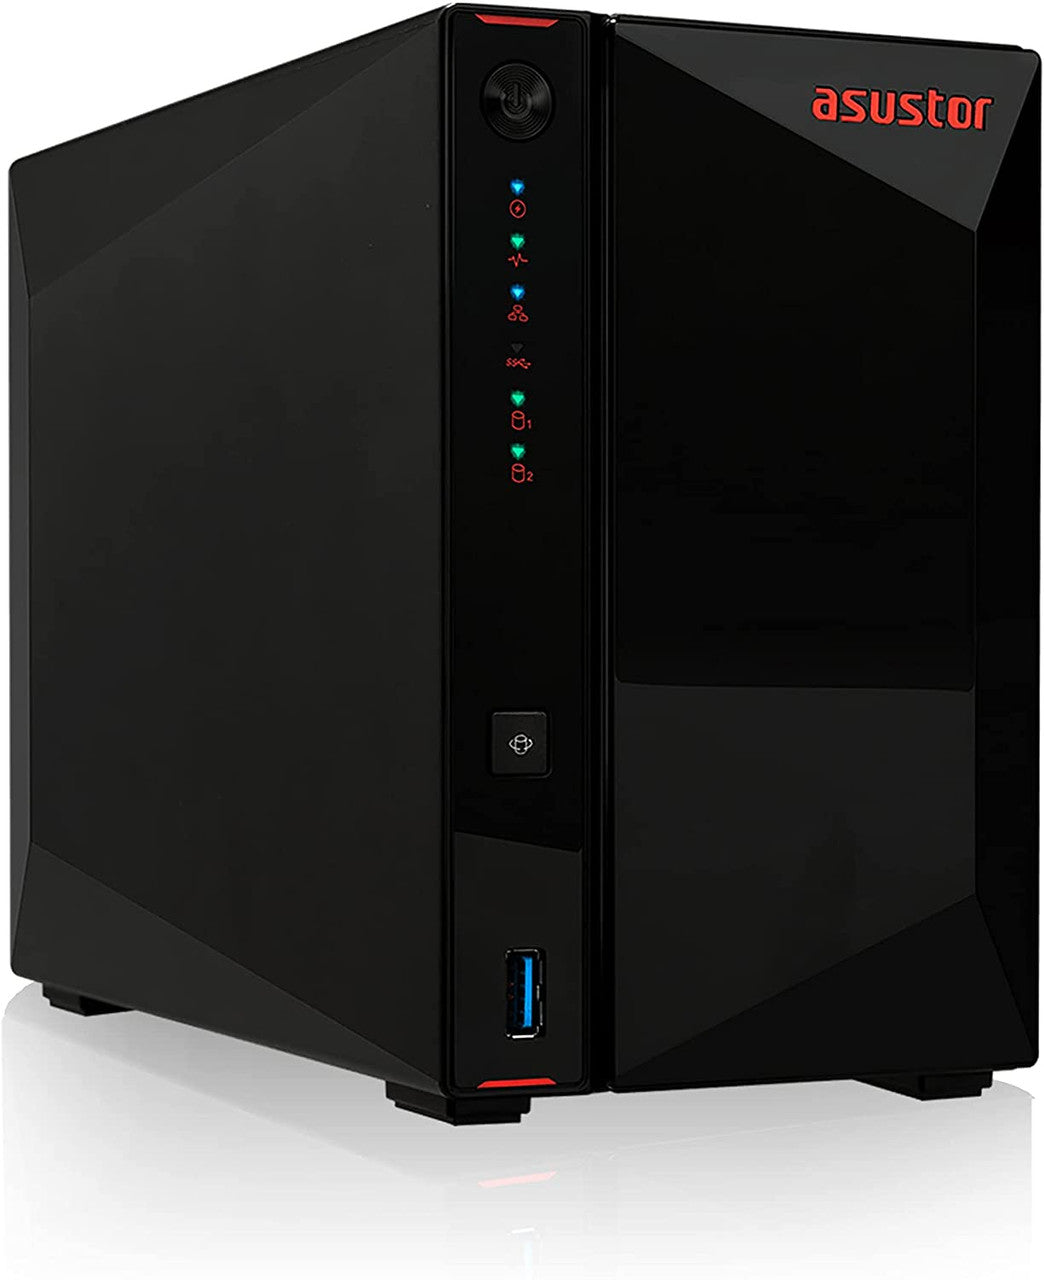 Asustor AS5202T 2-Bay Nimbustor 2 NAS with 8GB RAM and 28TB (2 x 14TB) Western Digital RED Plus Drives Fully Assembled and Tested